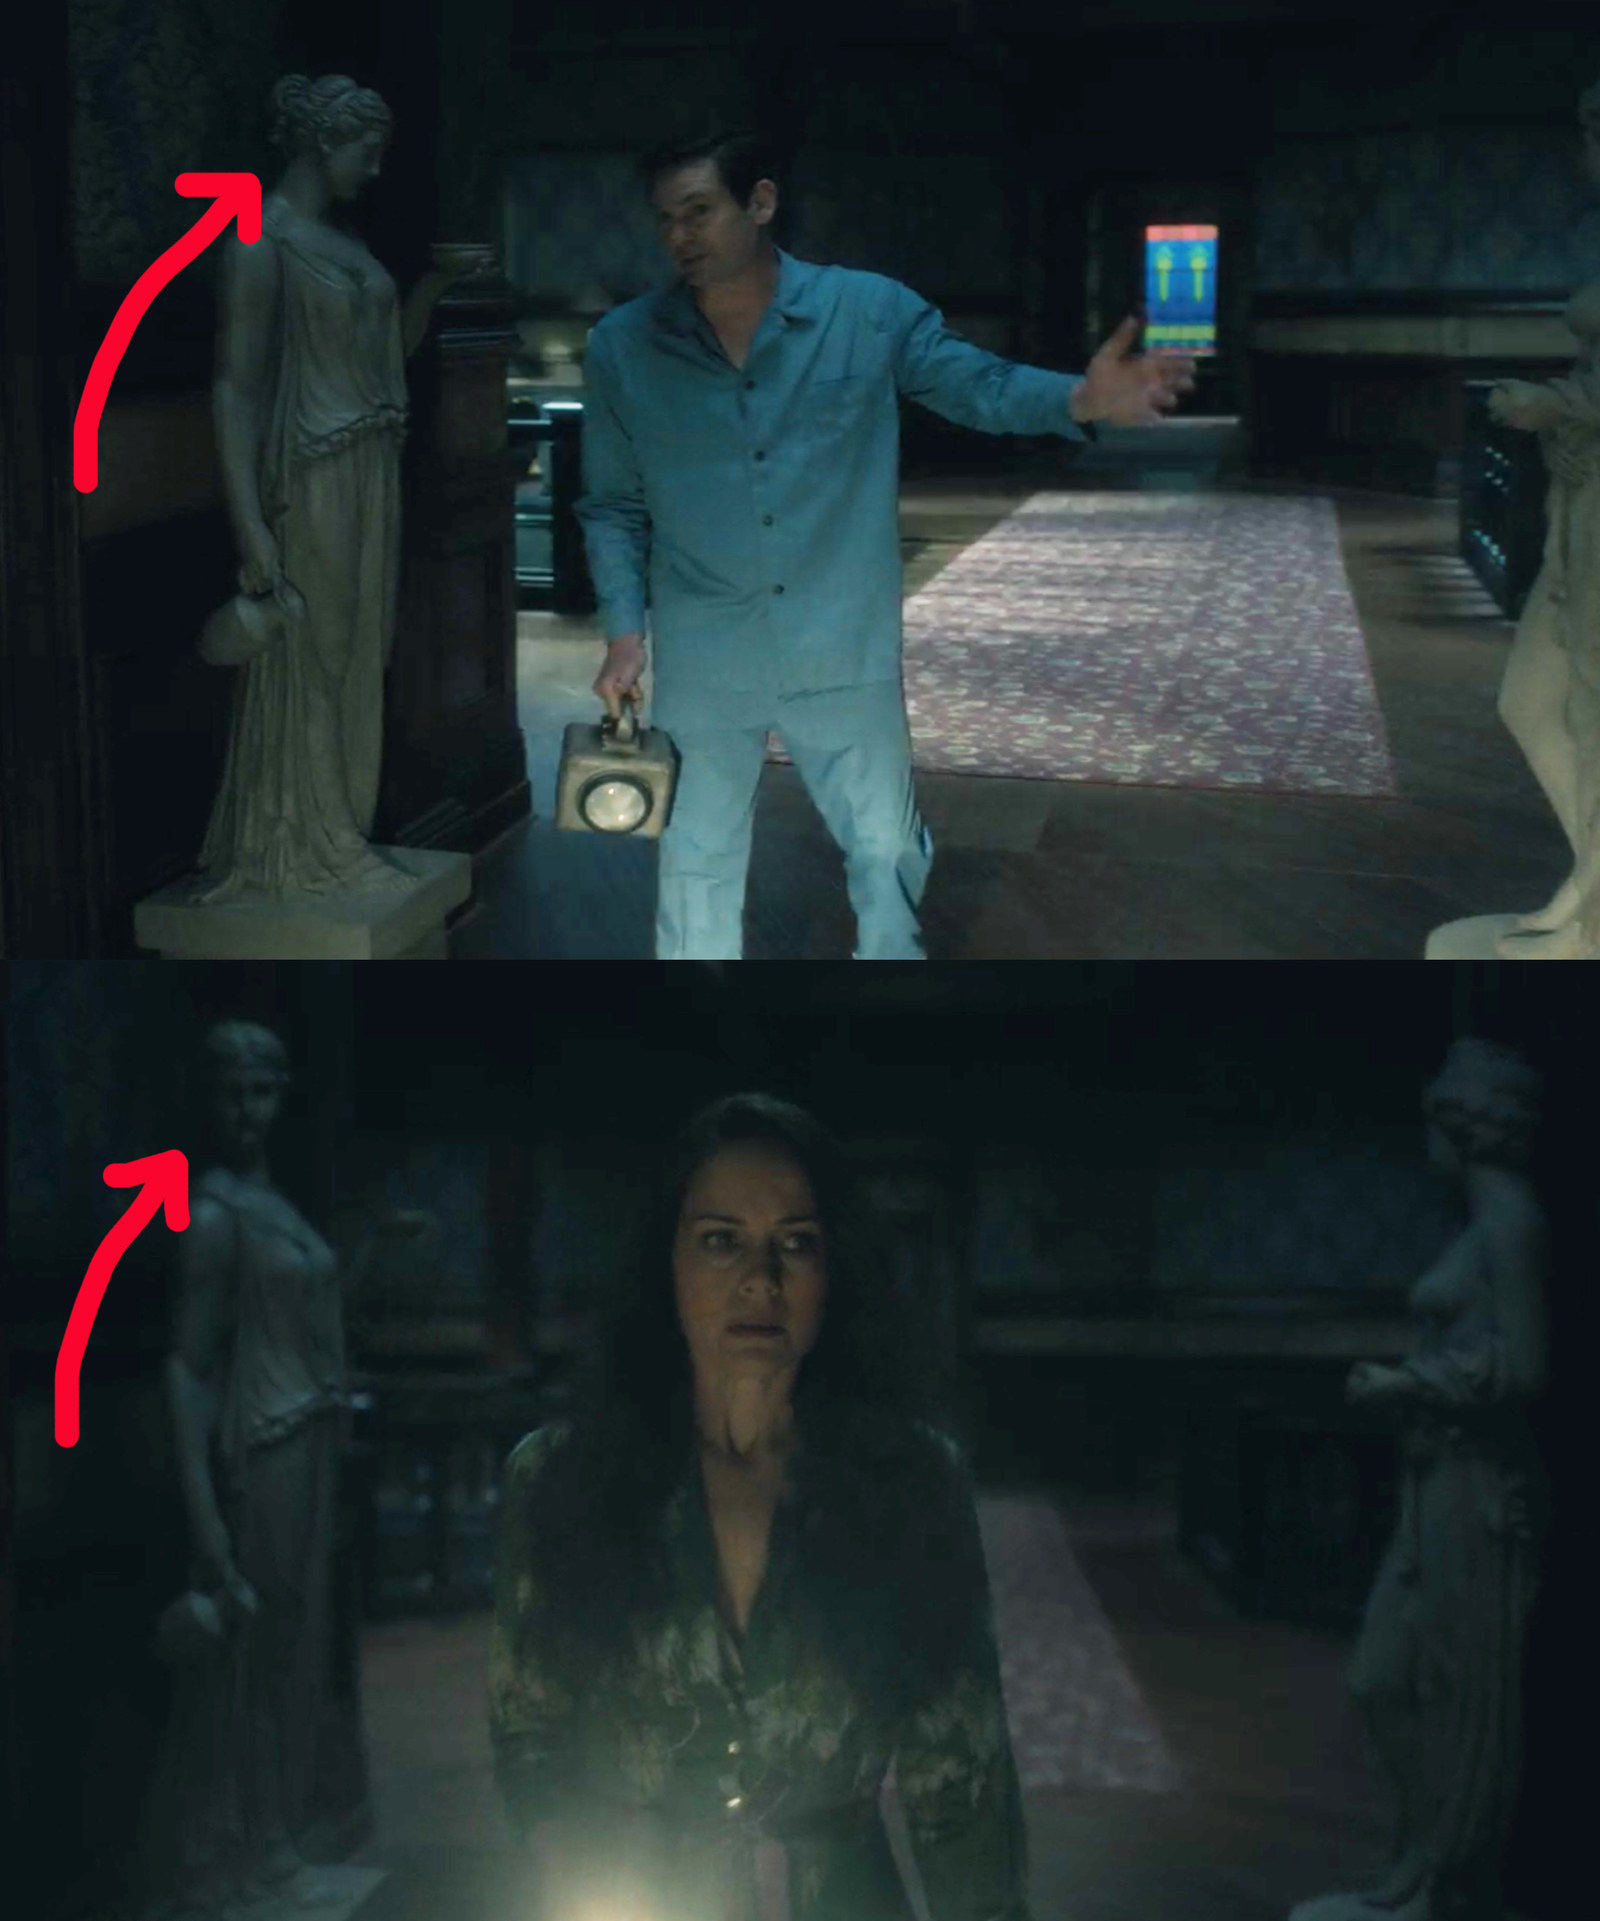 22 "The Haunting Of Hill House" Details You Probably Missed The First Time